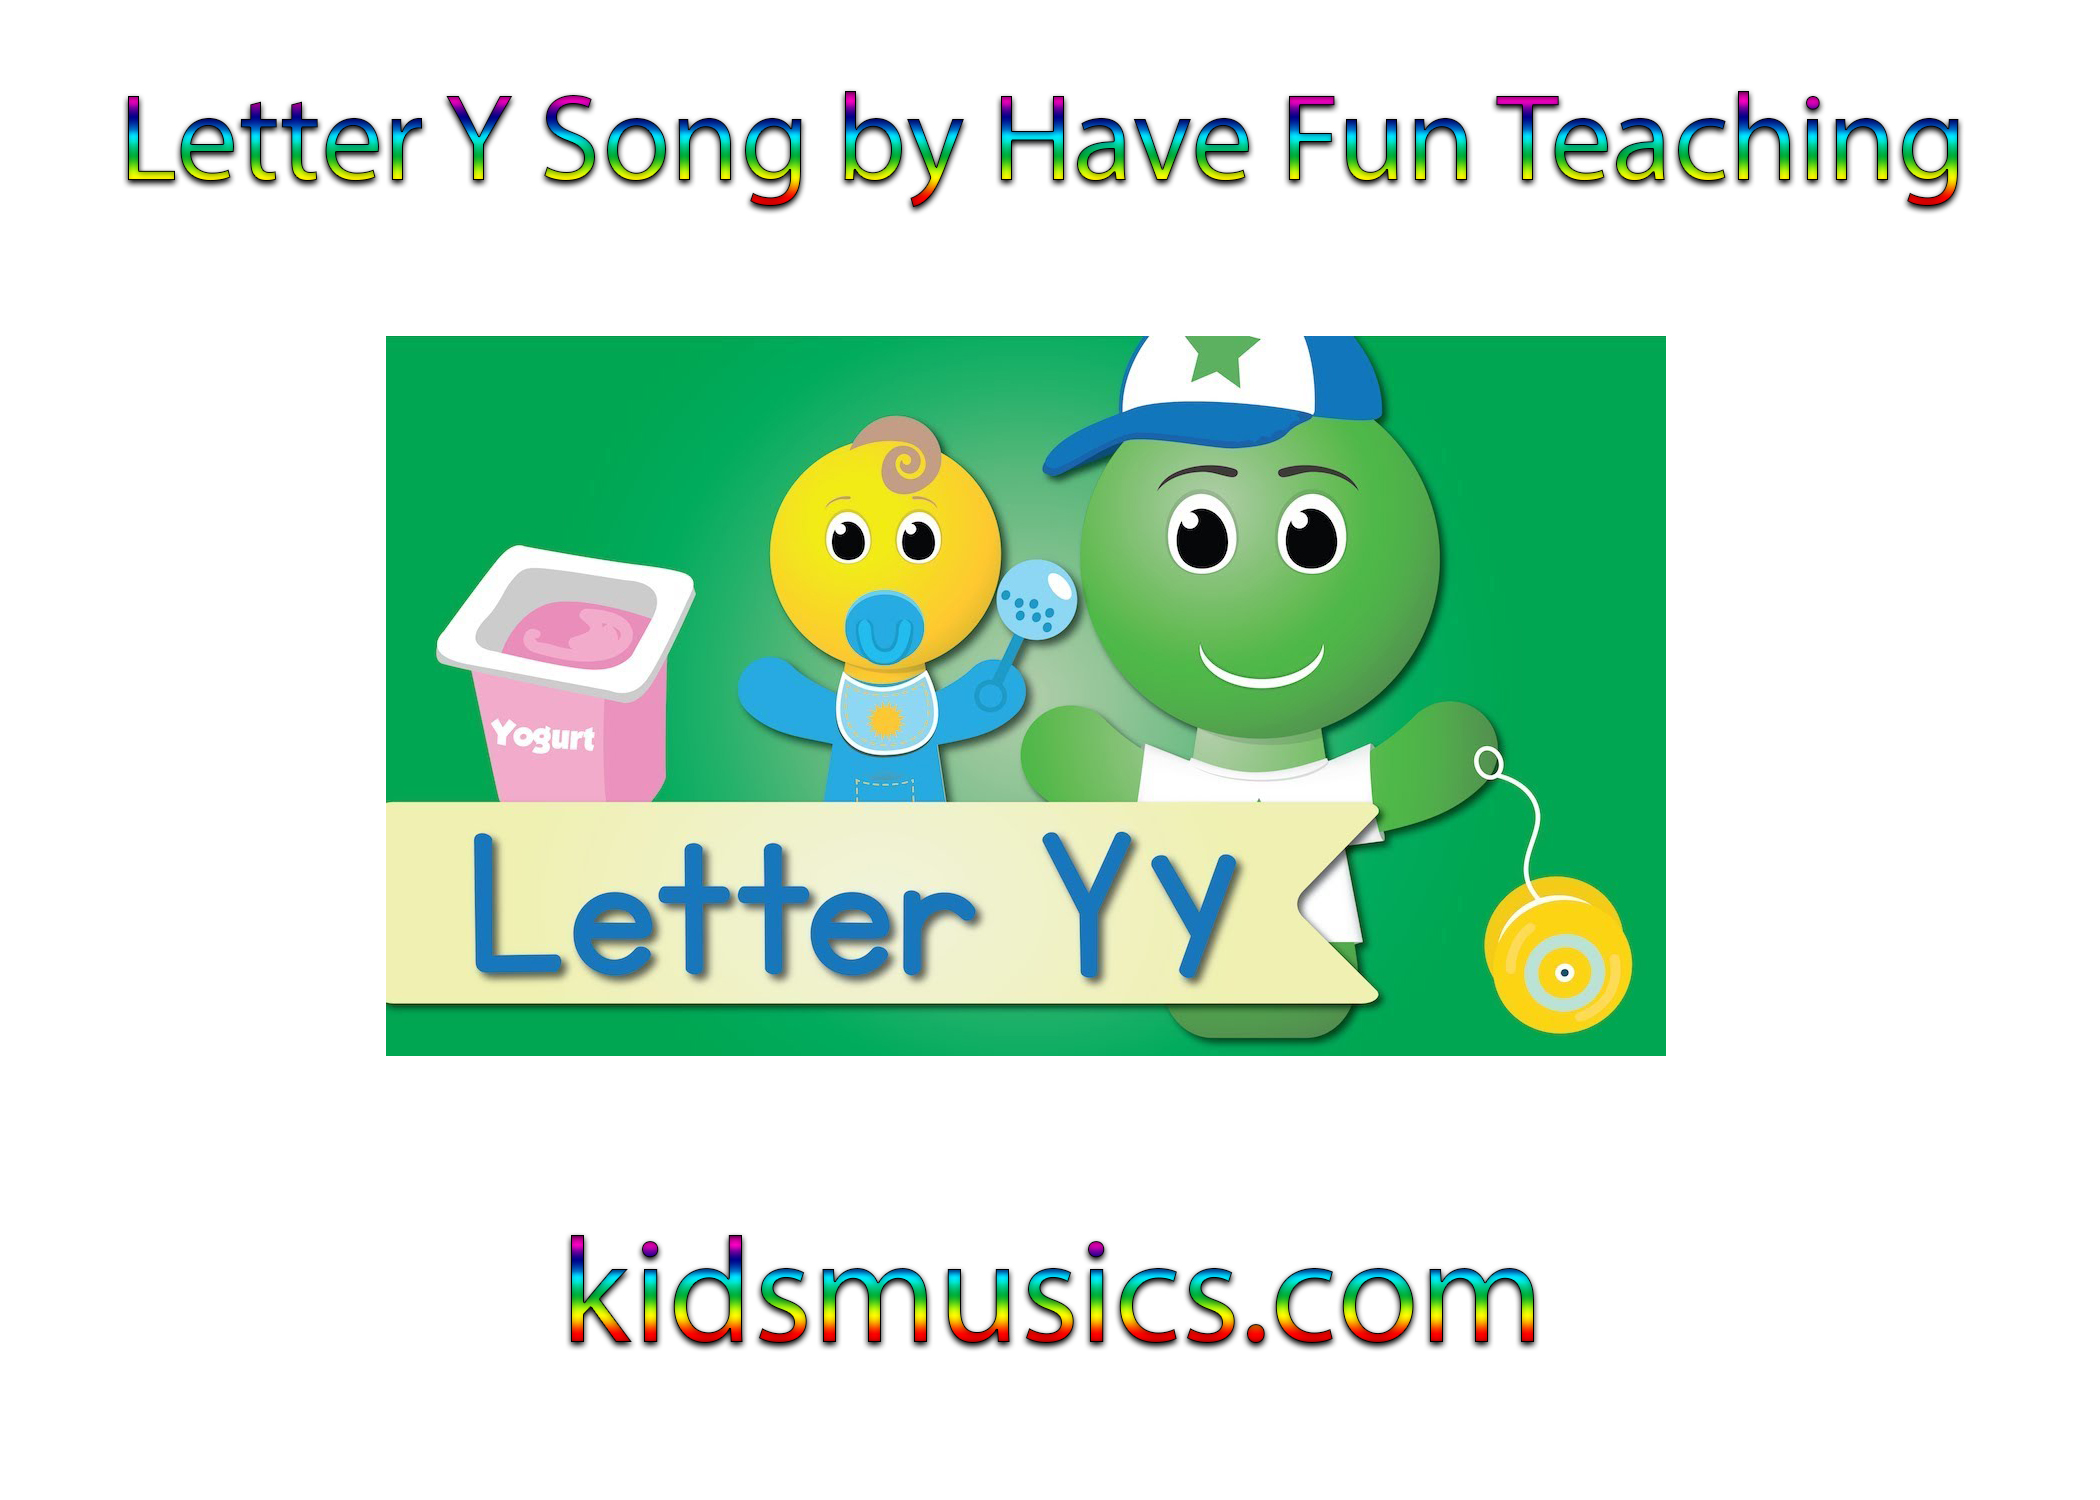 Letter Y Song by Have Fun Teaching